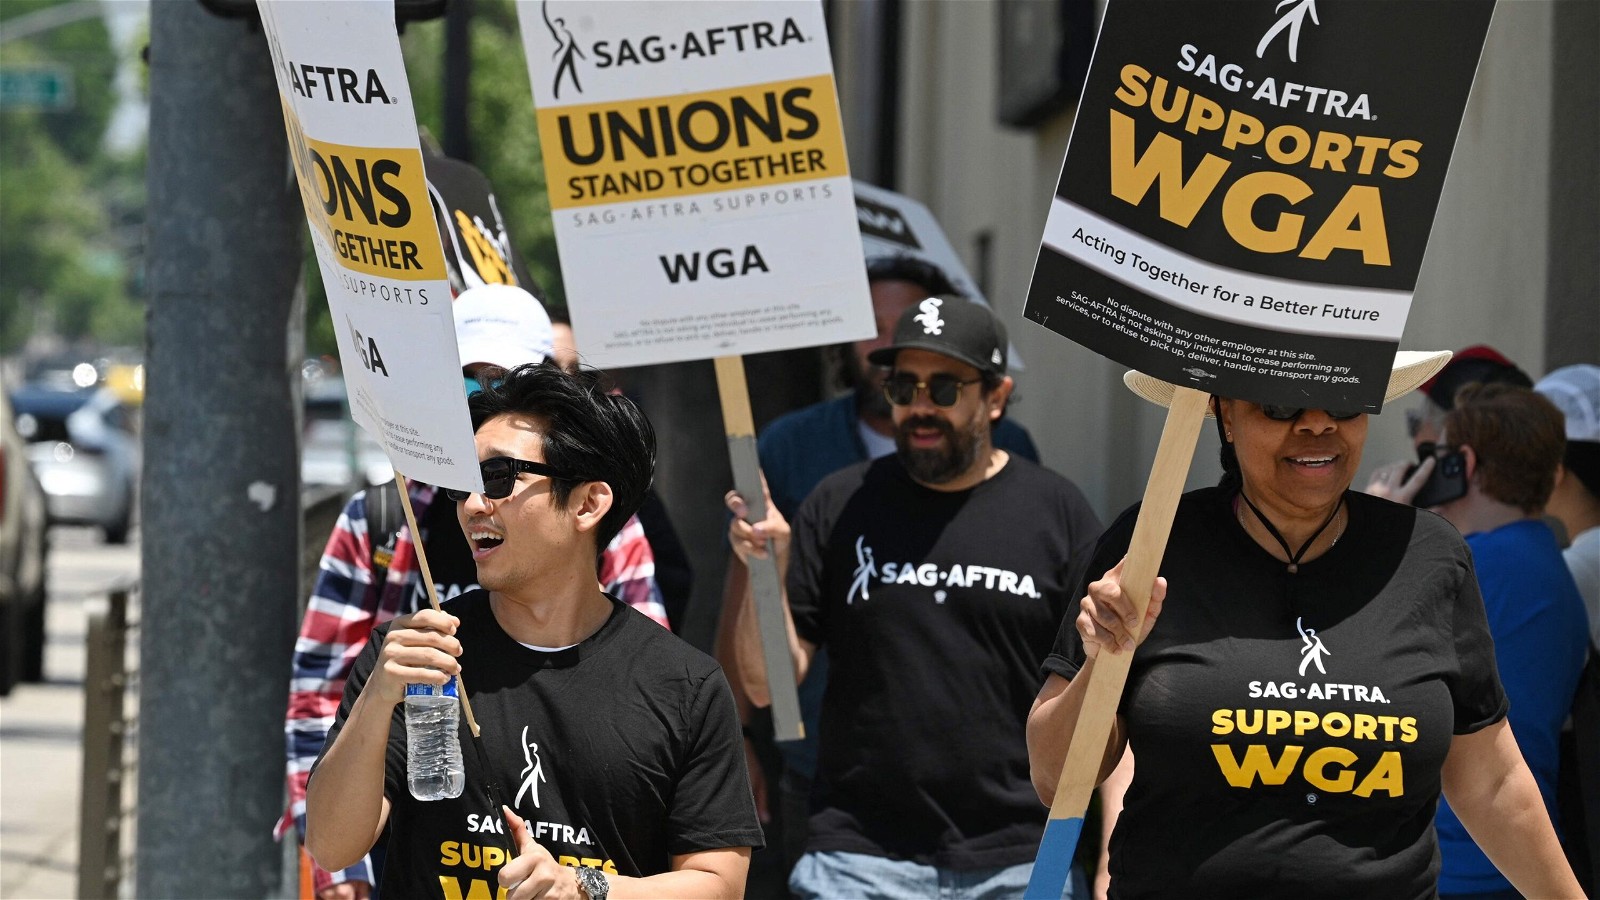 The members of SAG-AFTRA union go on a strike